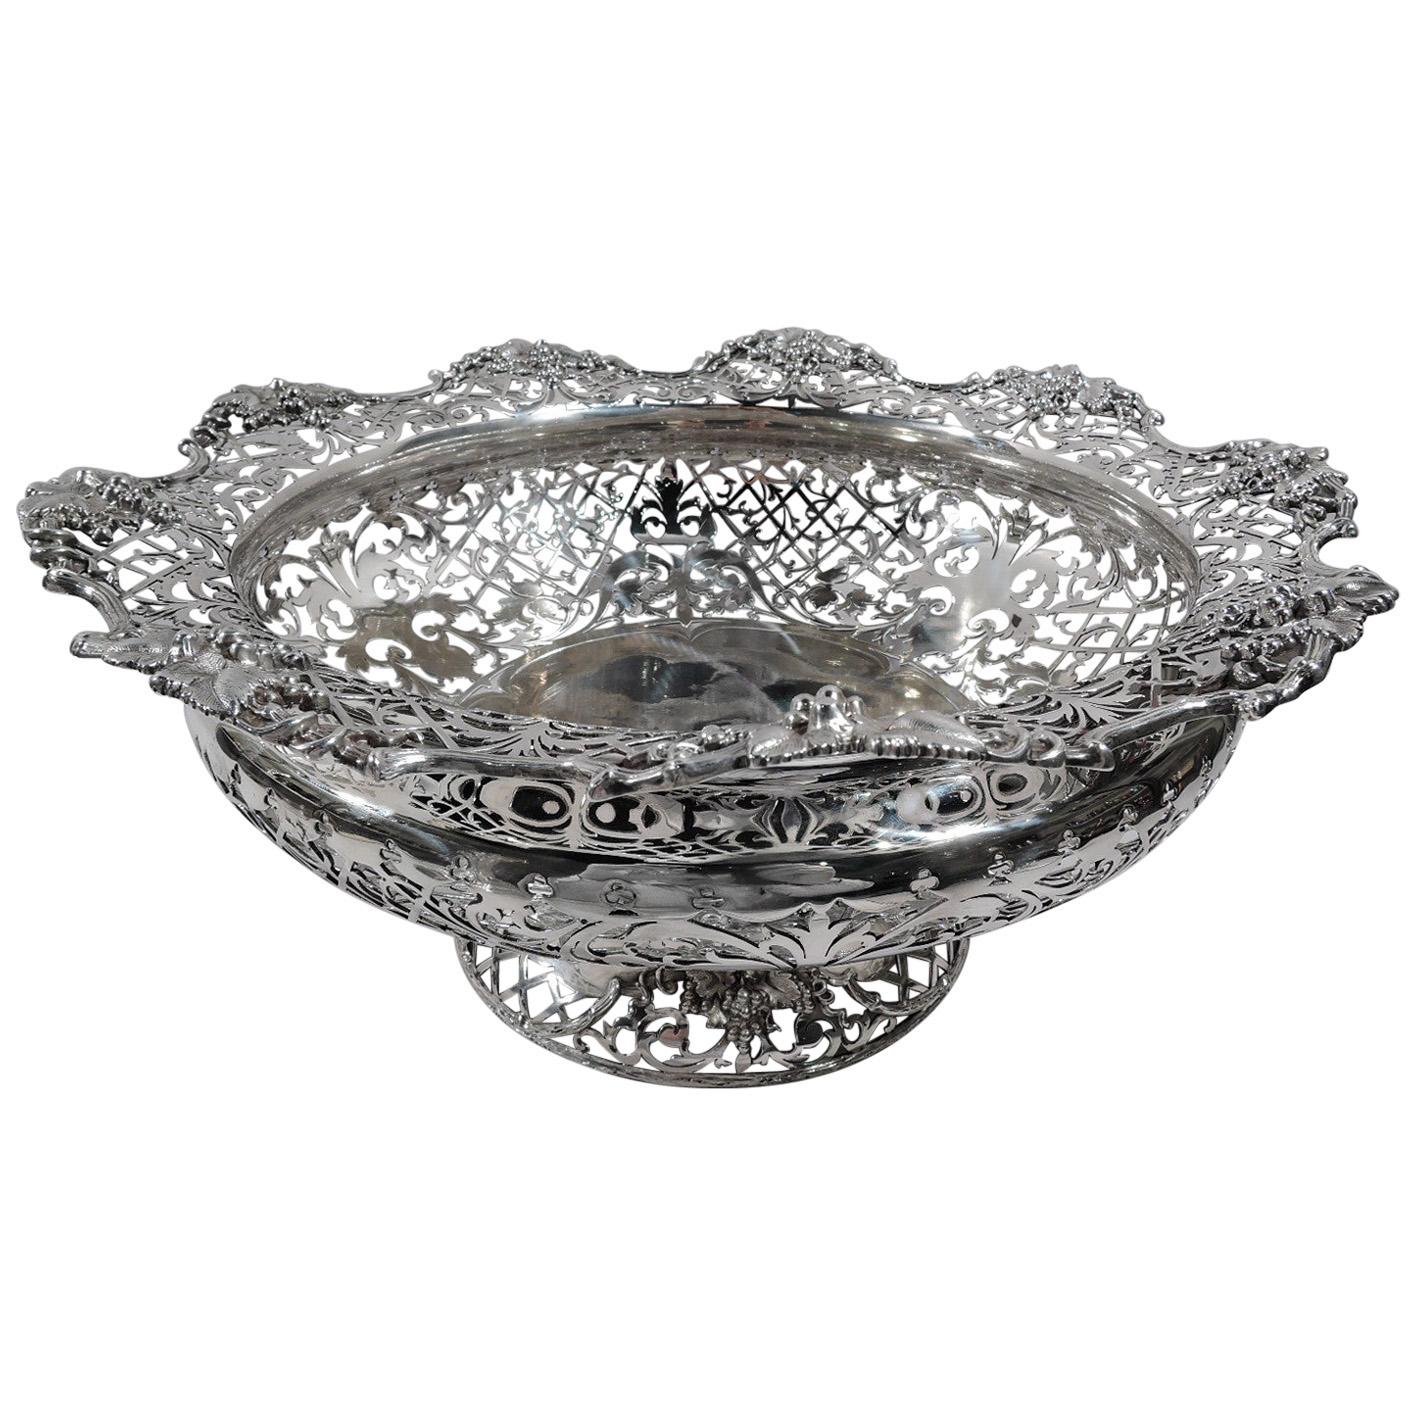 Magnificent English Edwardian Pierced Sterling Silver Centerpiece Bowl